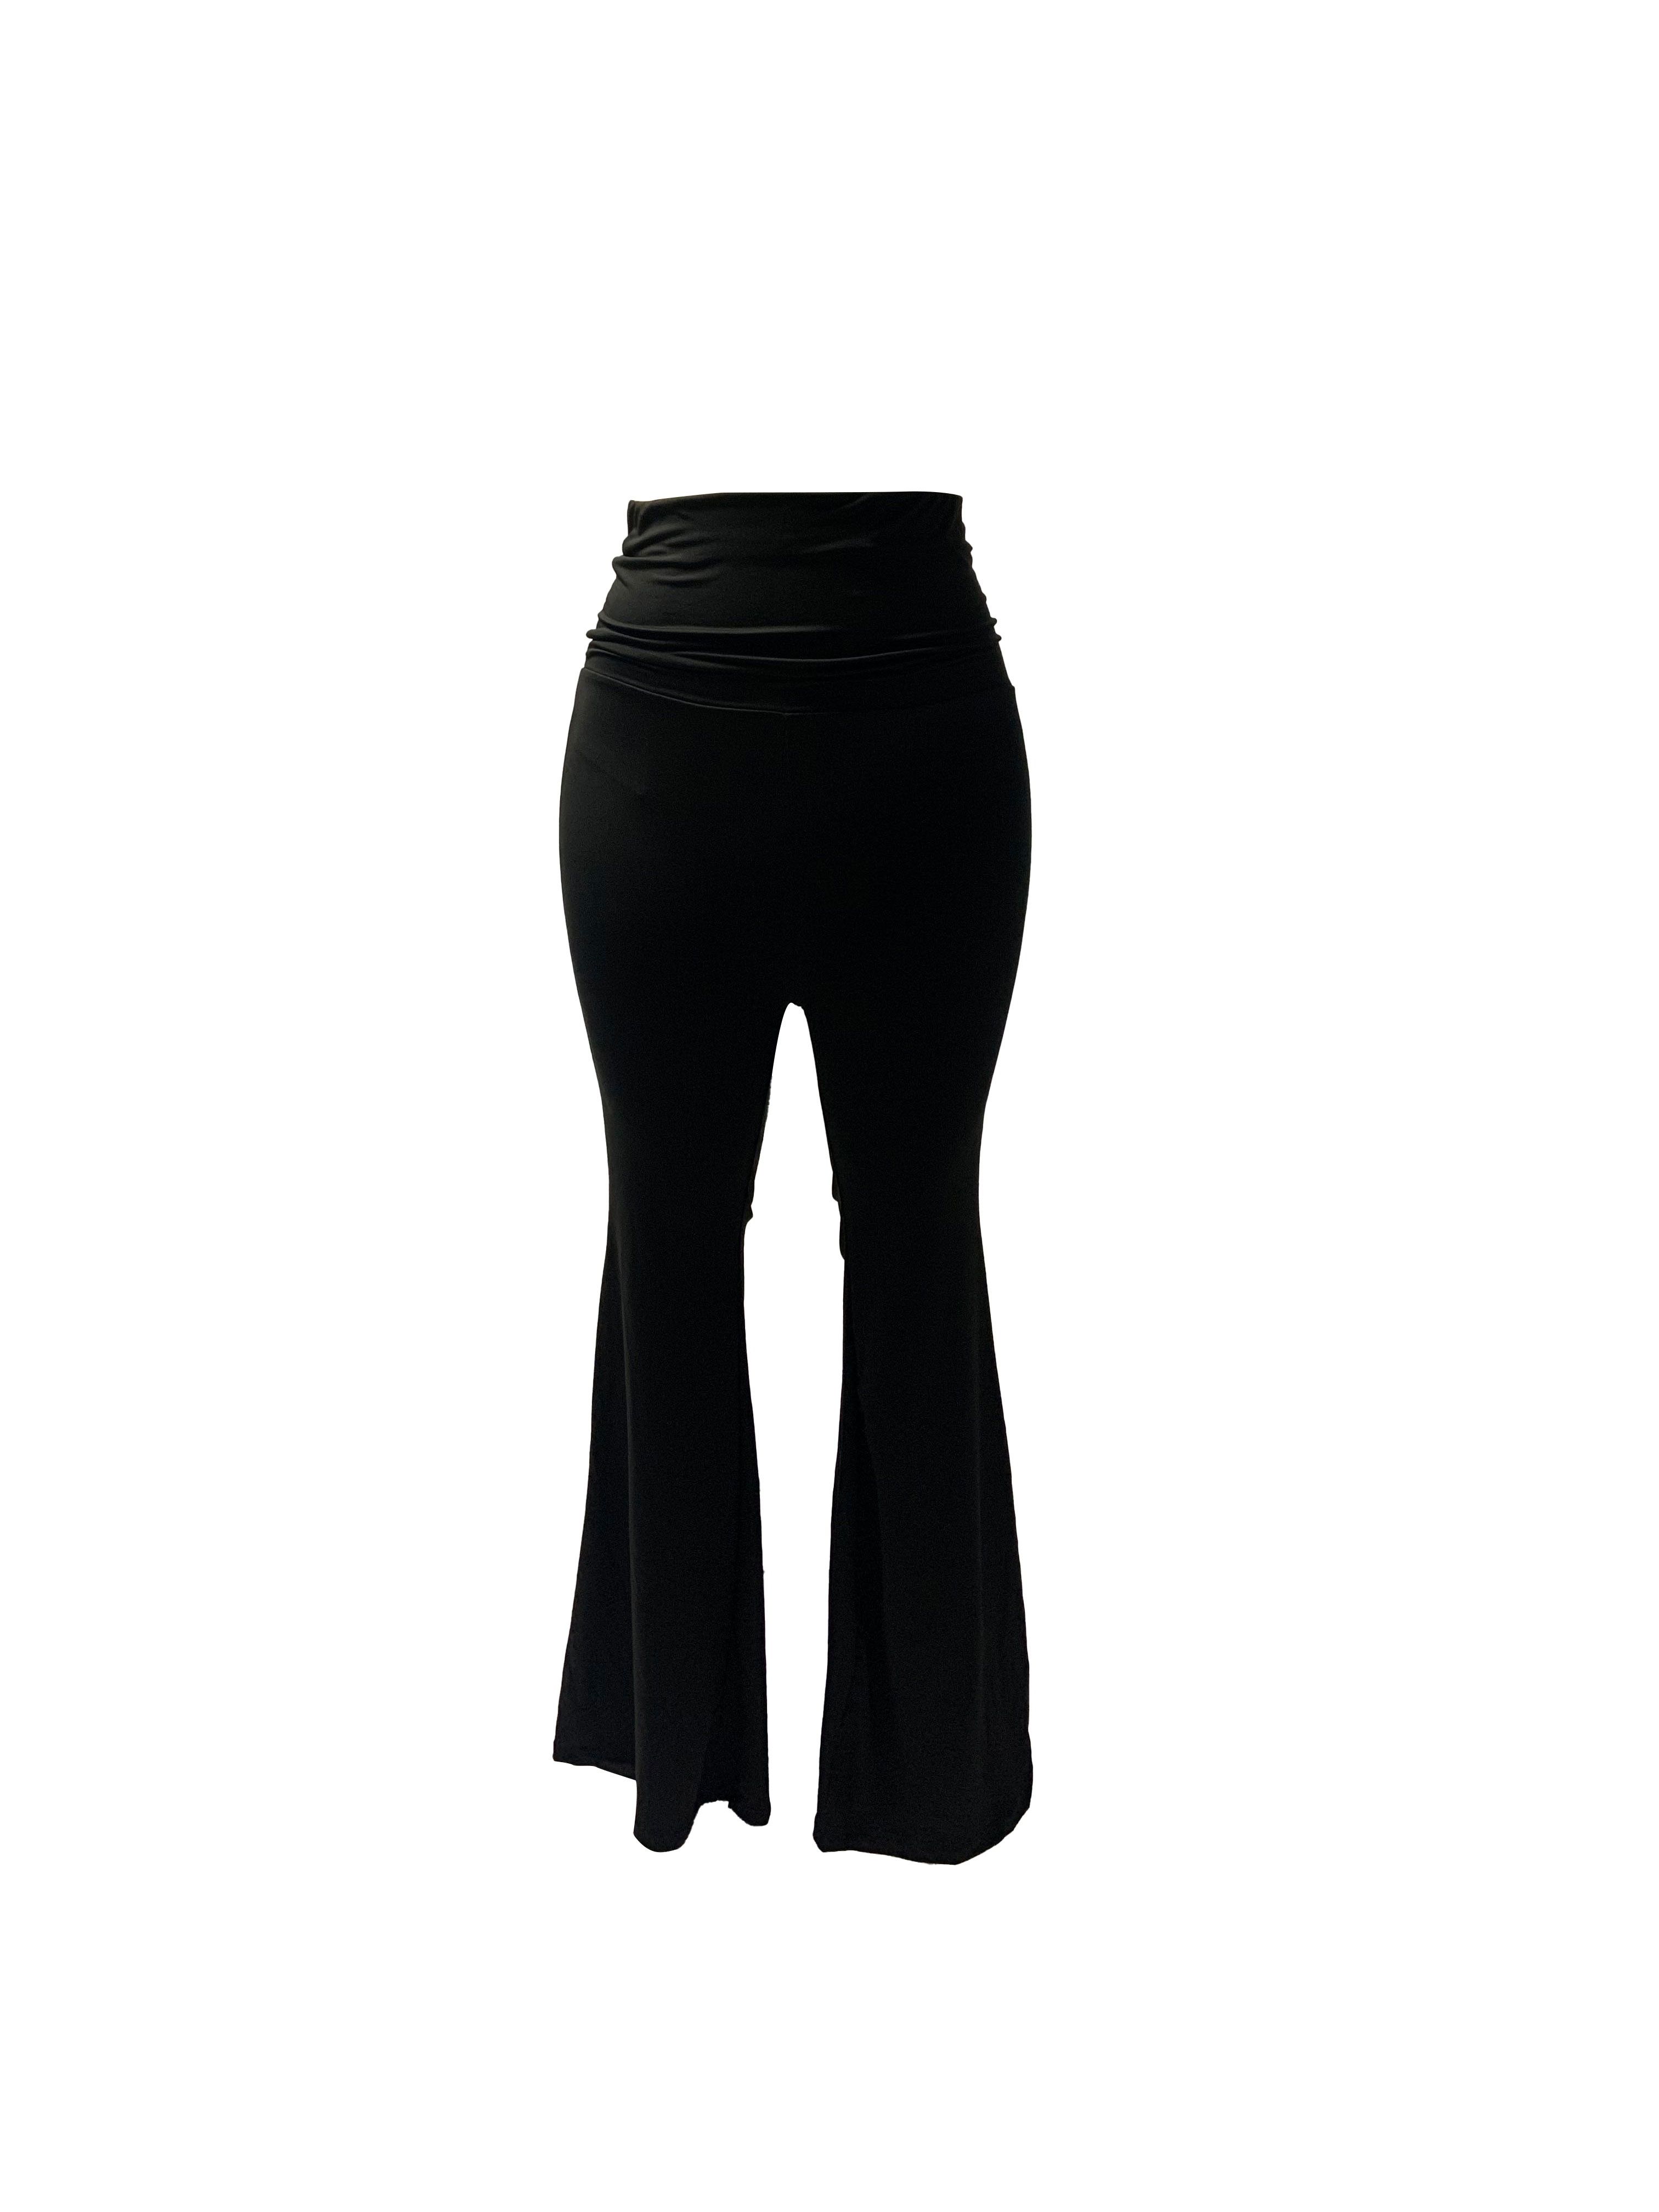 Y2K High Waist Black Flare Pants 90s Aesthetics, Slim Fit, Full Length,  Perfect For Streetwear, Goth And Basic High Waisted Flared Trousers For  Women From Cinda02, $12.58